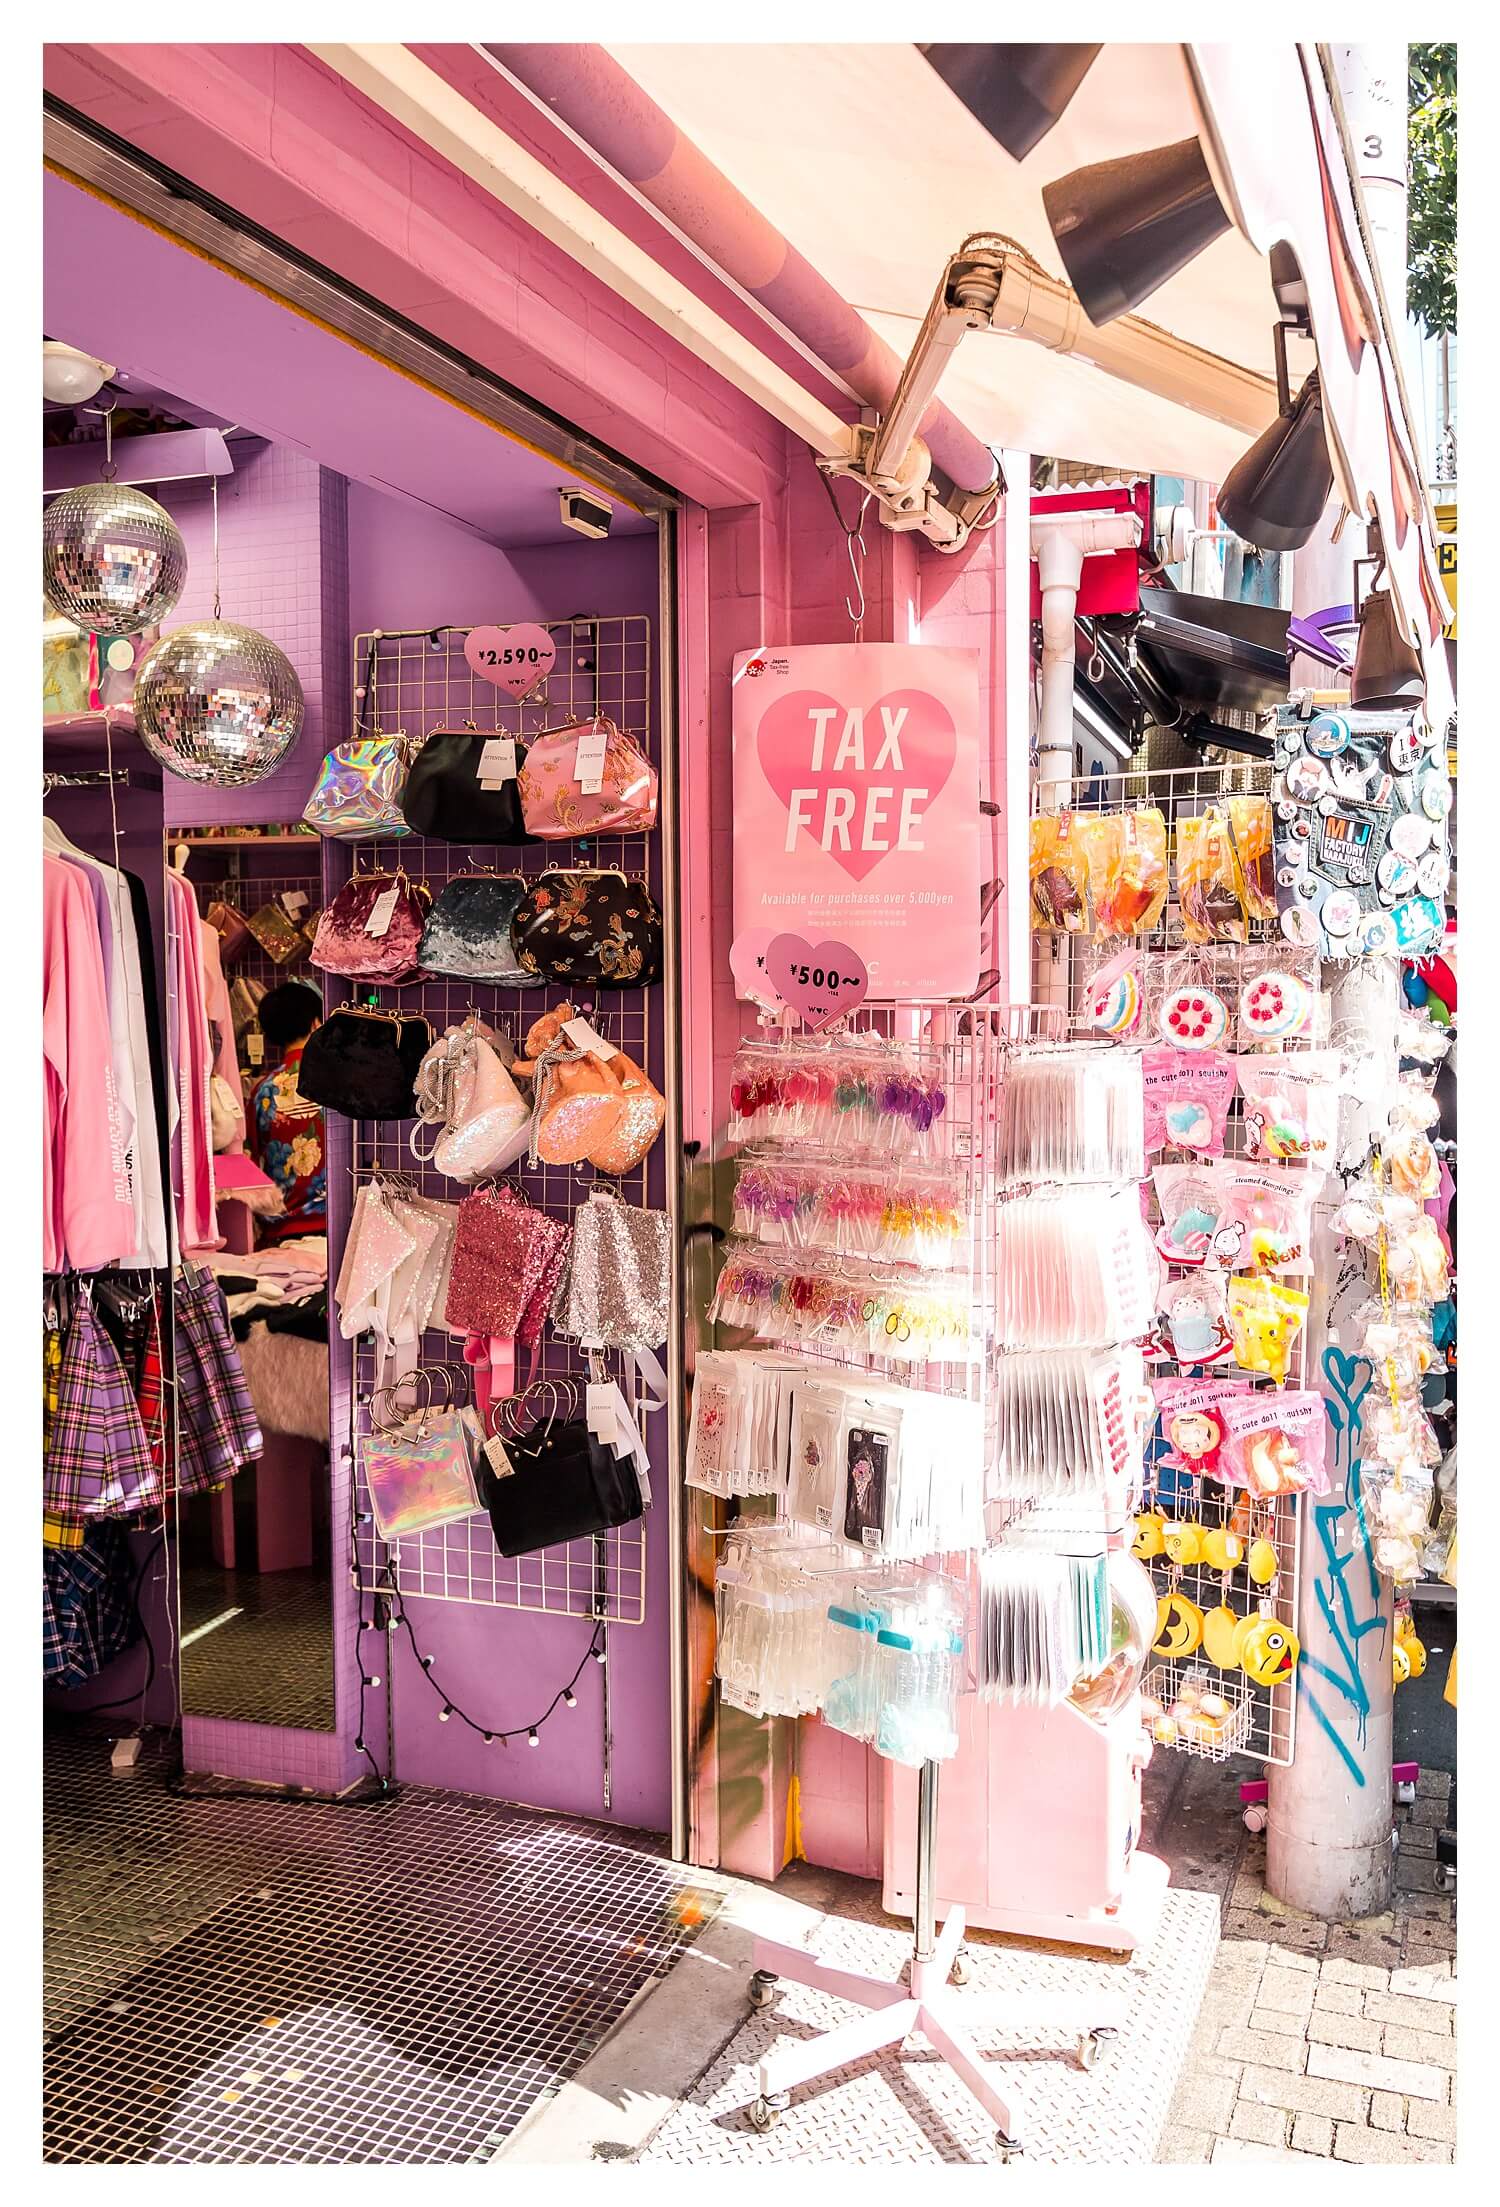 The Complete Guide To Harajuku - Tokyo's Cute, Cool Crazy Fashion - Hedonisitit